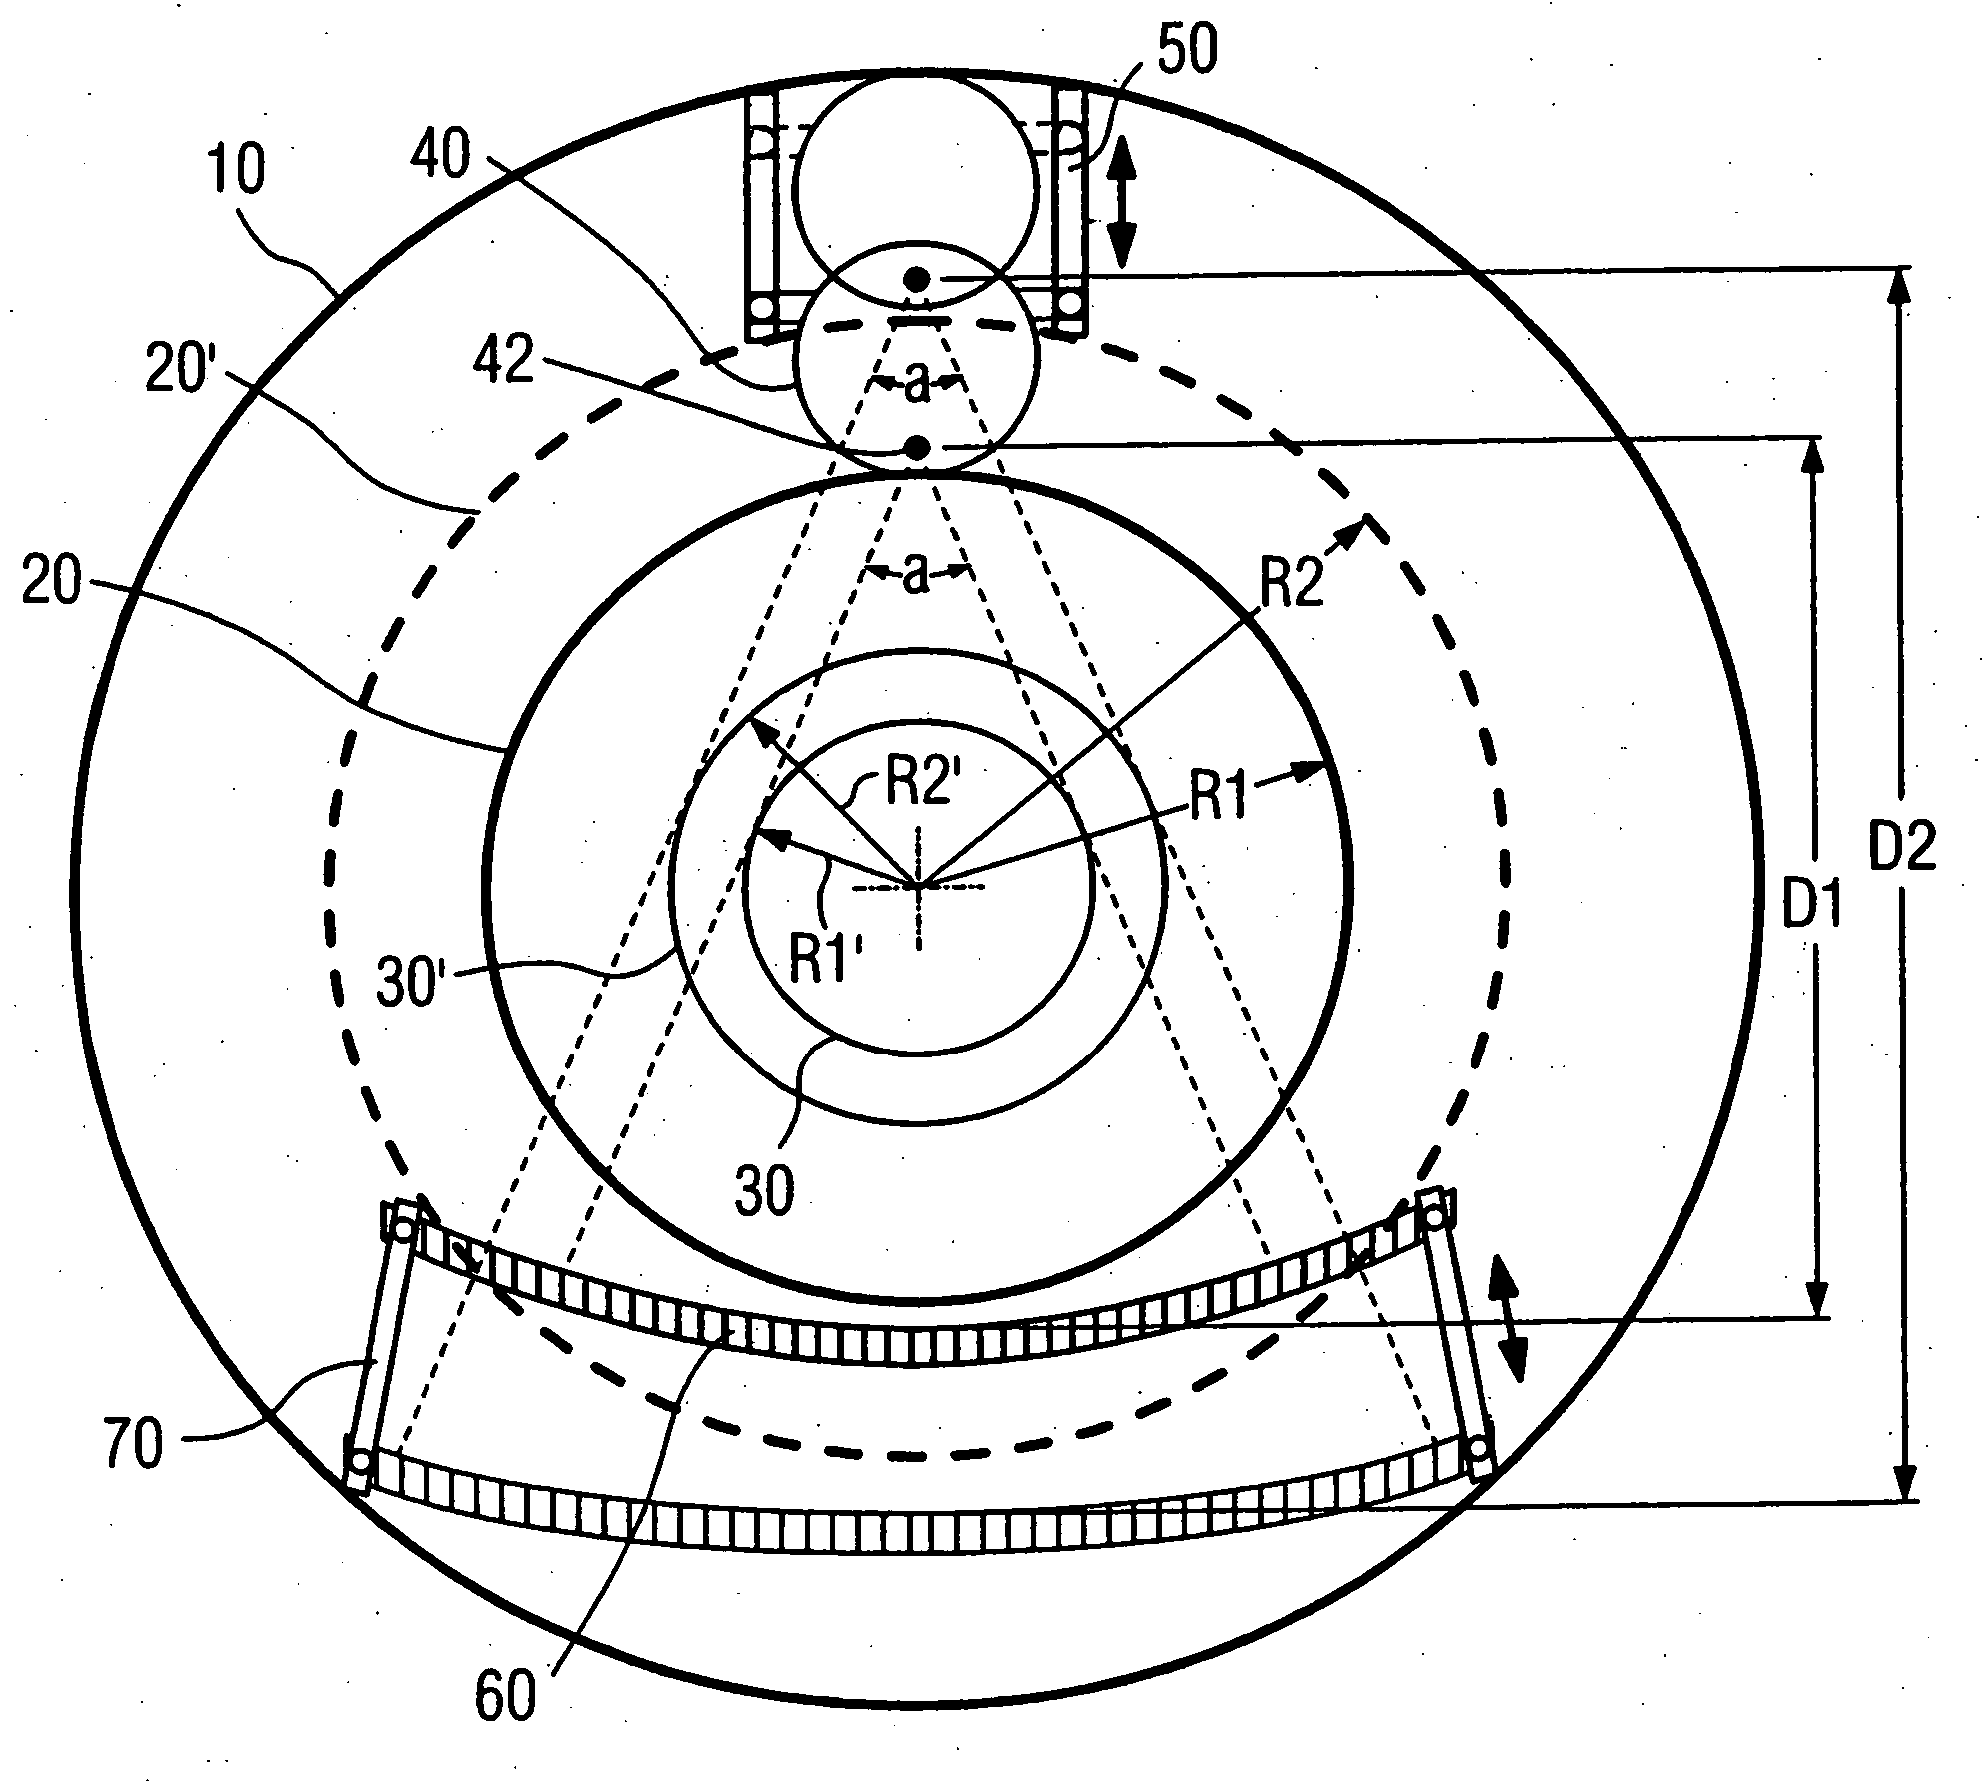 Computed tomography system with adjustable focal spot-to-detector distance